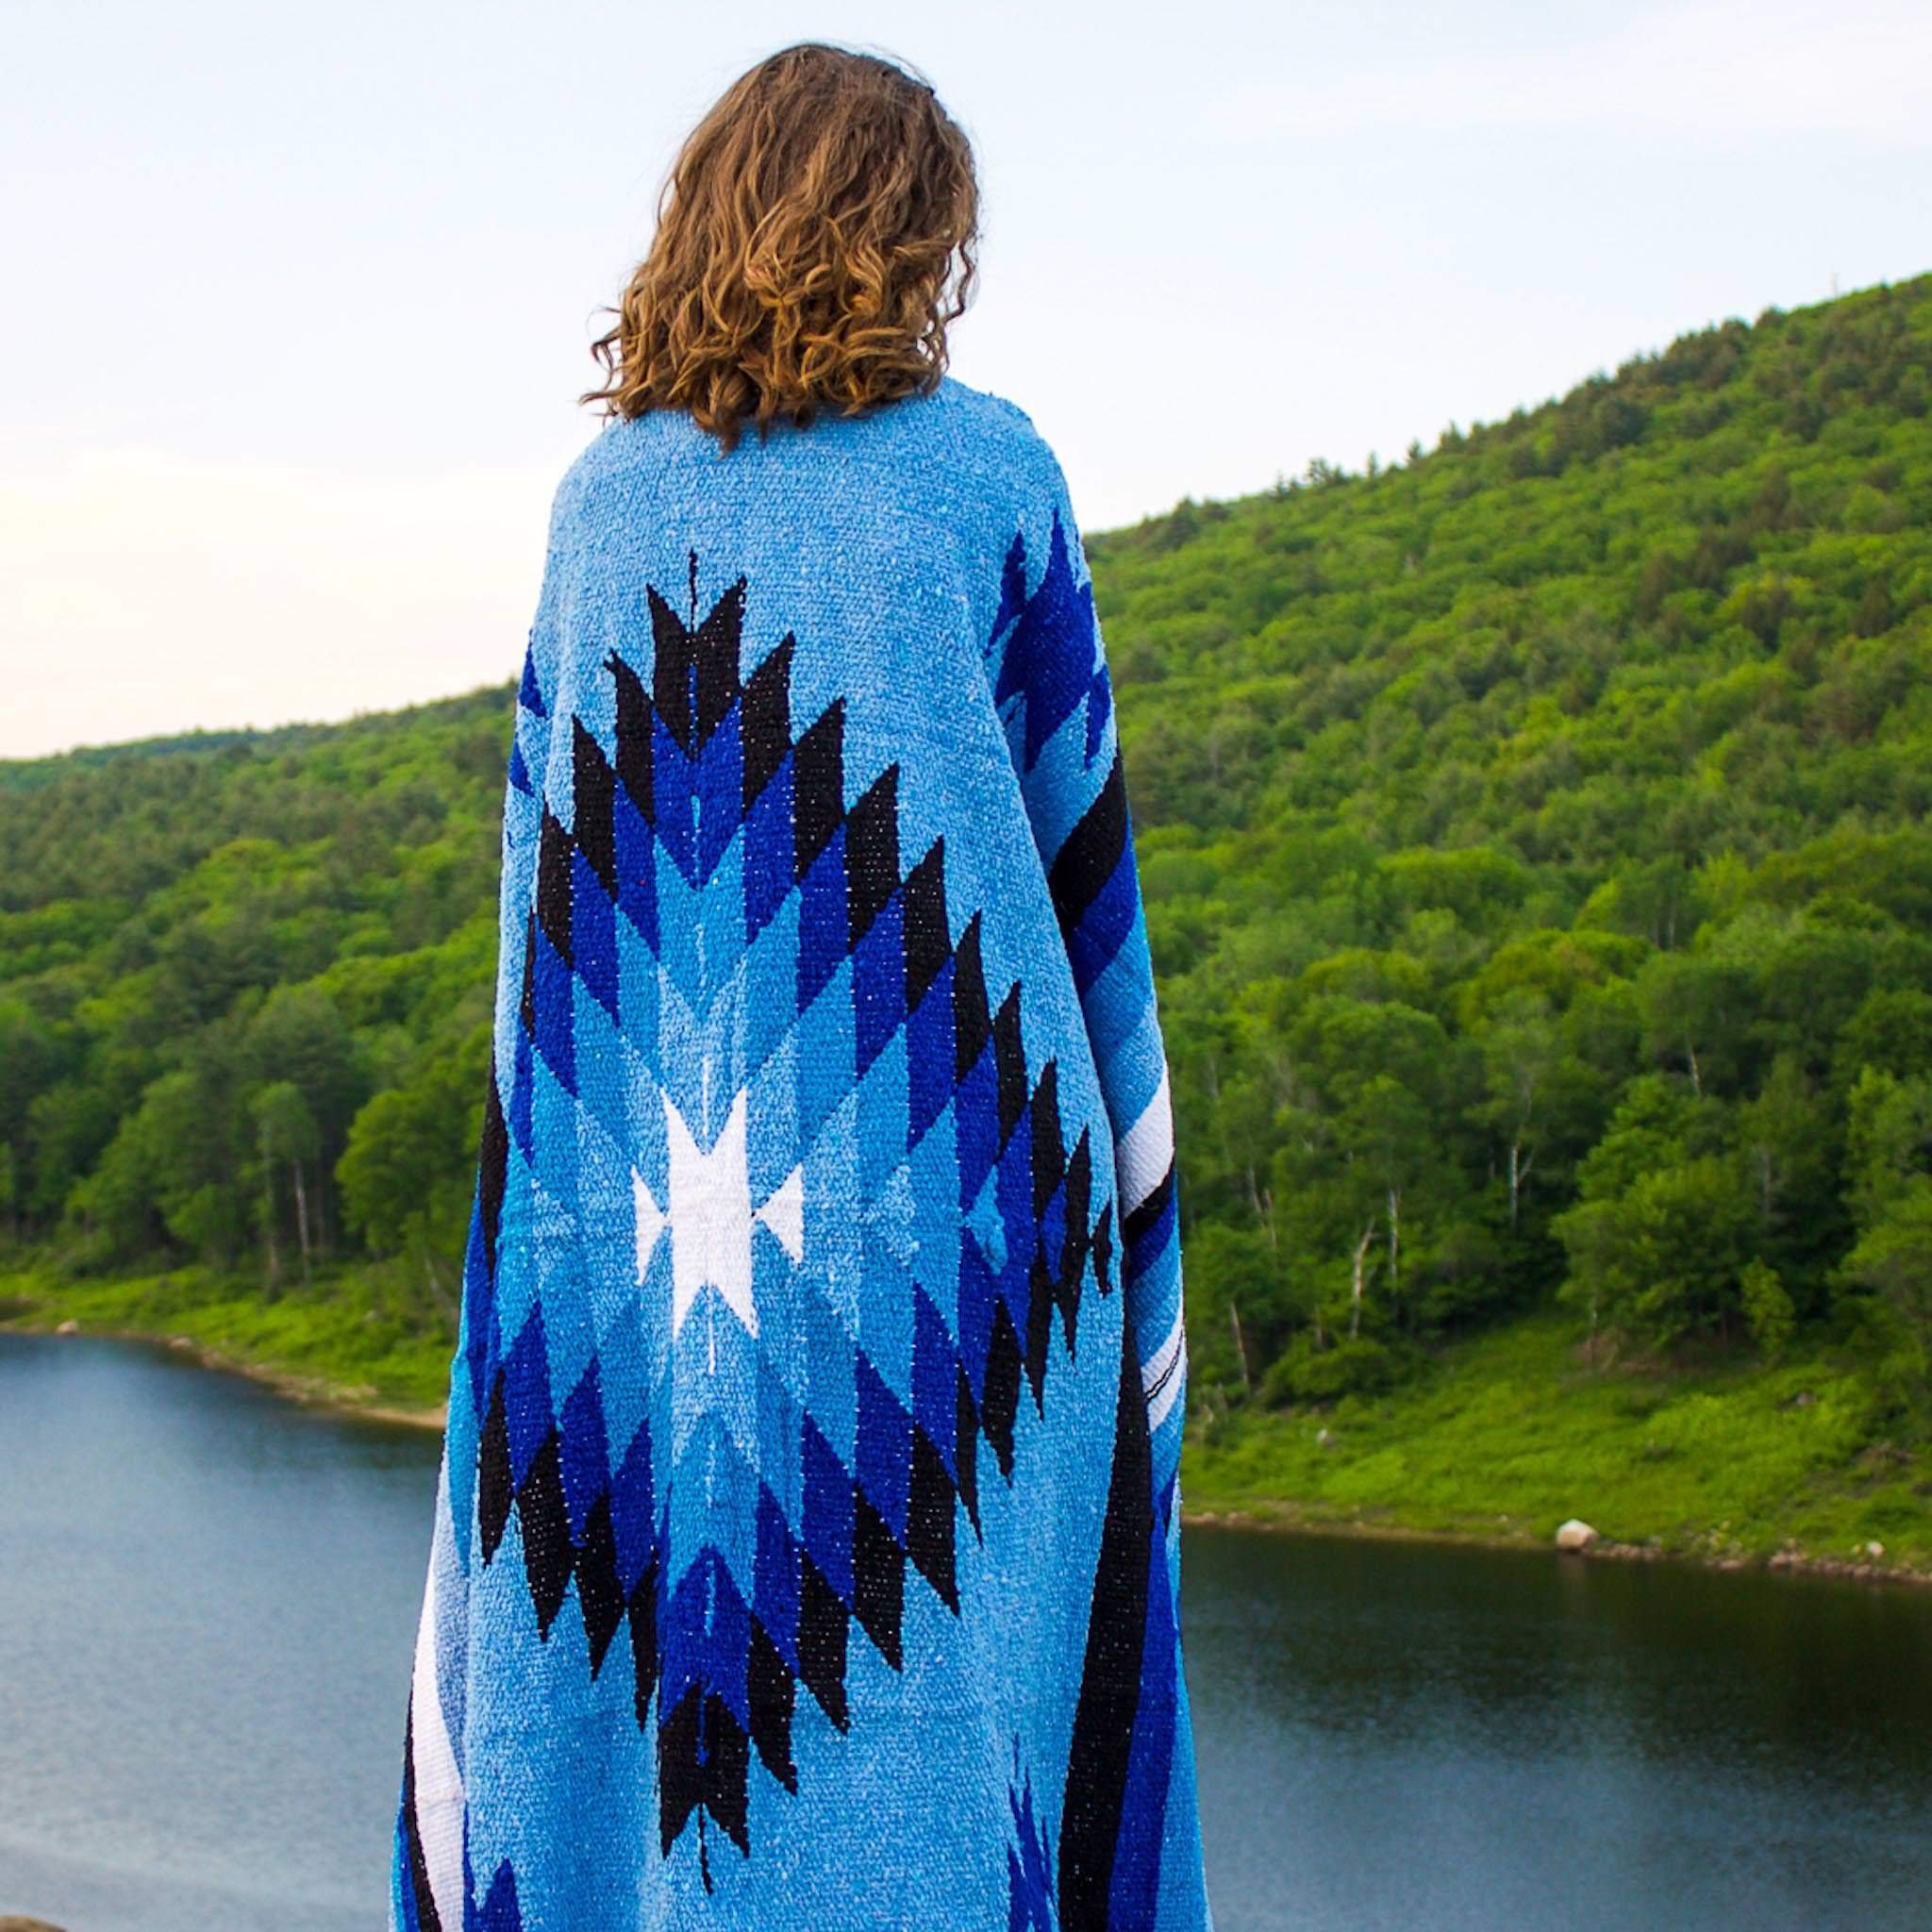 Model shown from behind wrapped in handwoven Mexican blanket with diamond and stripe design in shades of blue, black and white with mountain and lake background